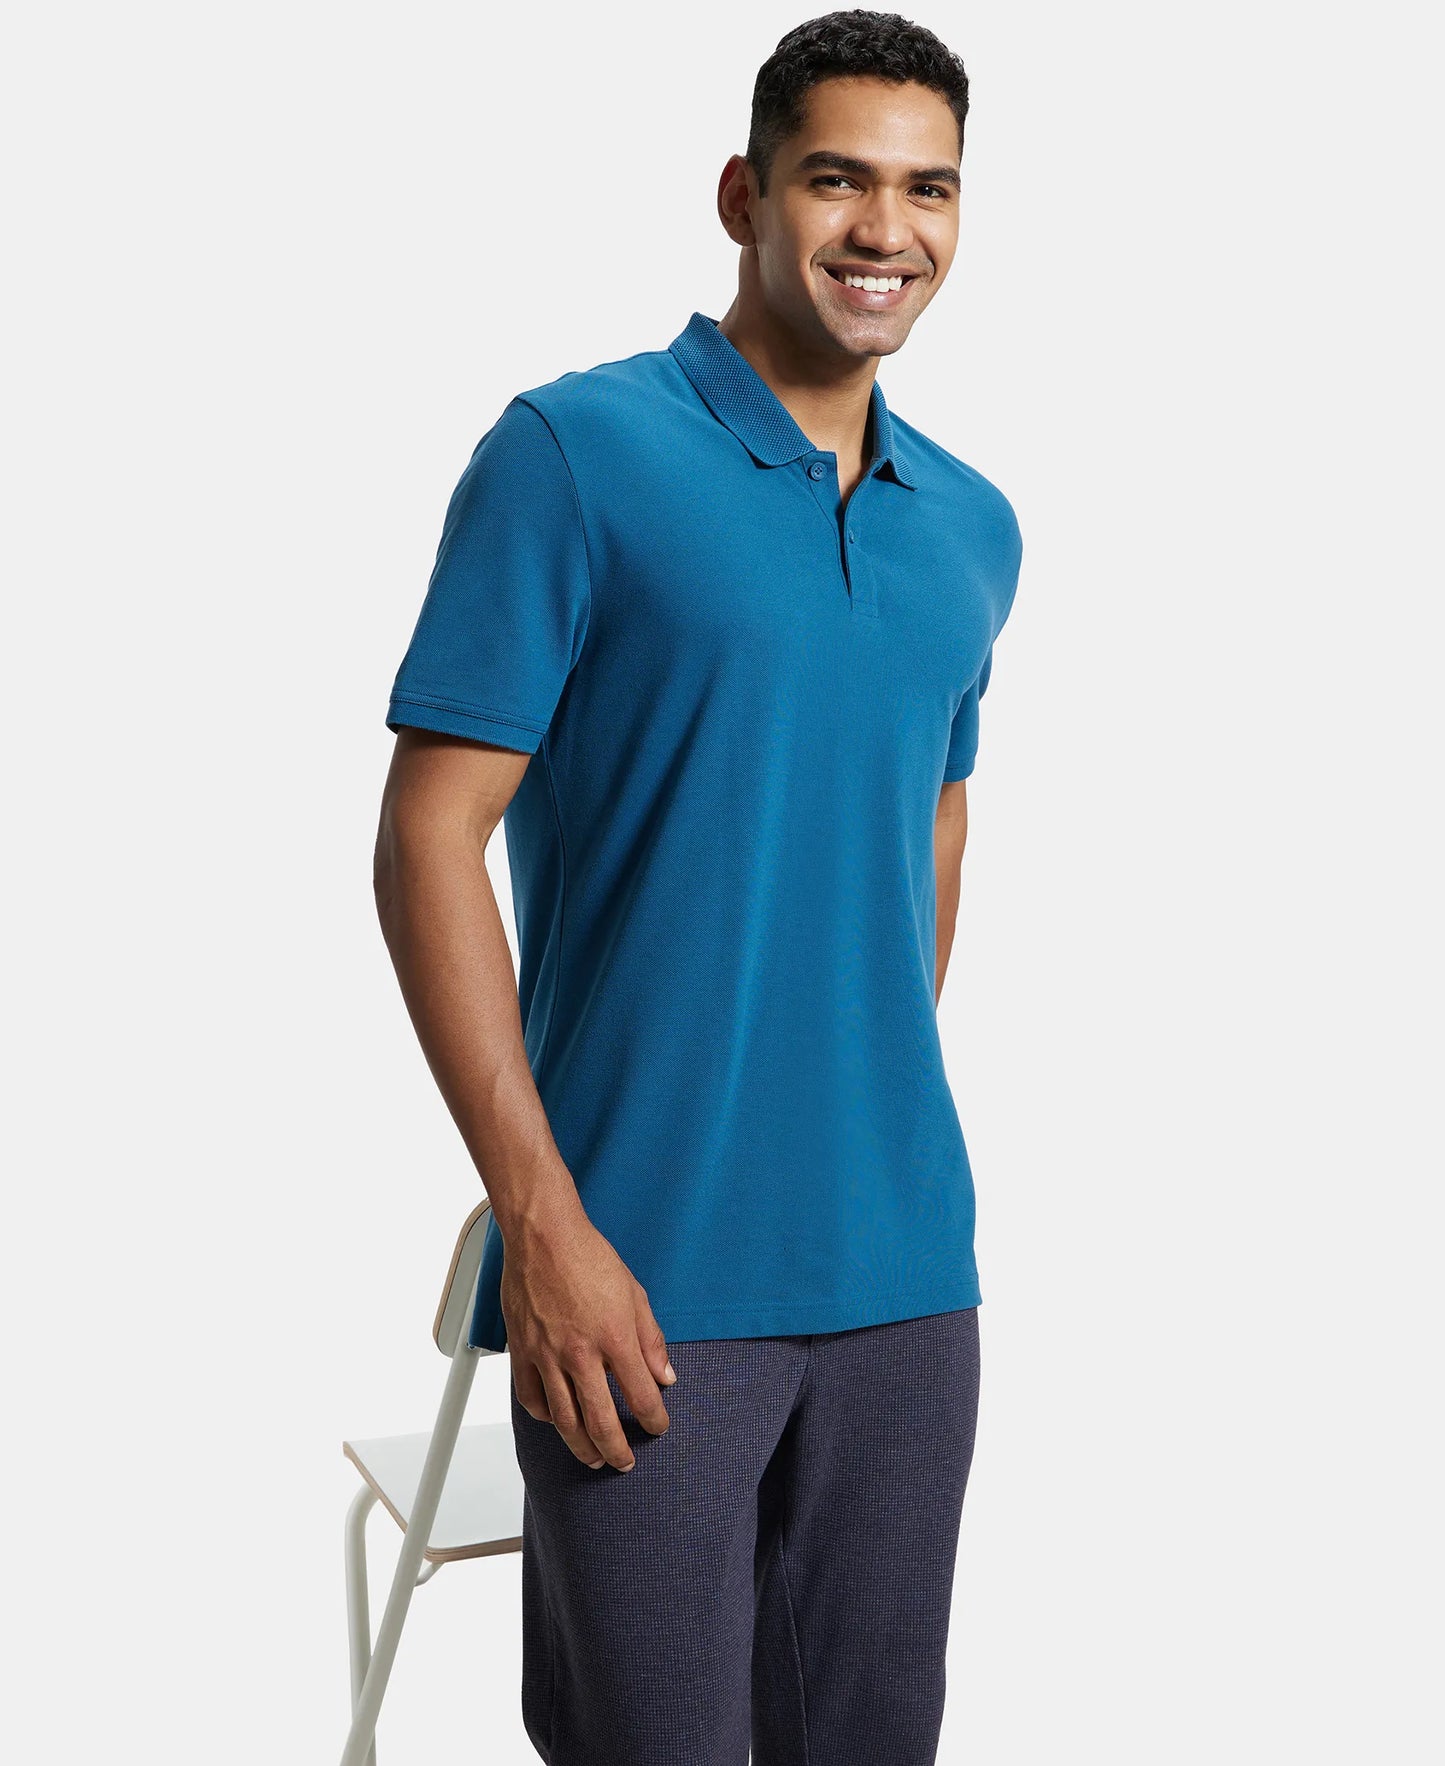 Super Combed Cotton Rich Pique Fabric Solid Half Sleeve Polo T-Shirt - Seaport Teal-6